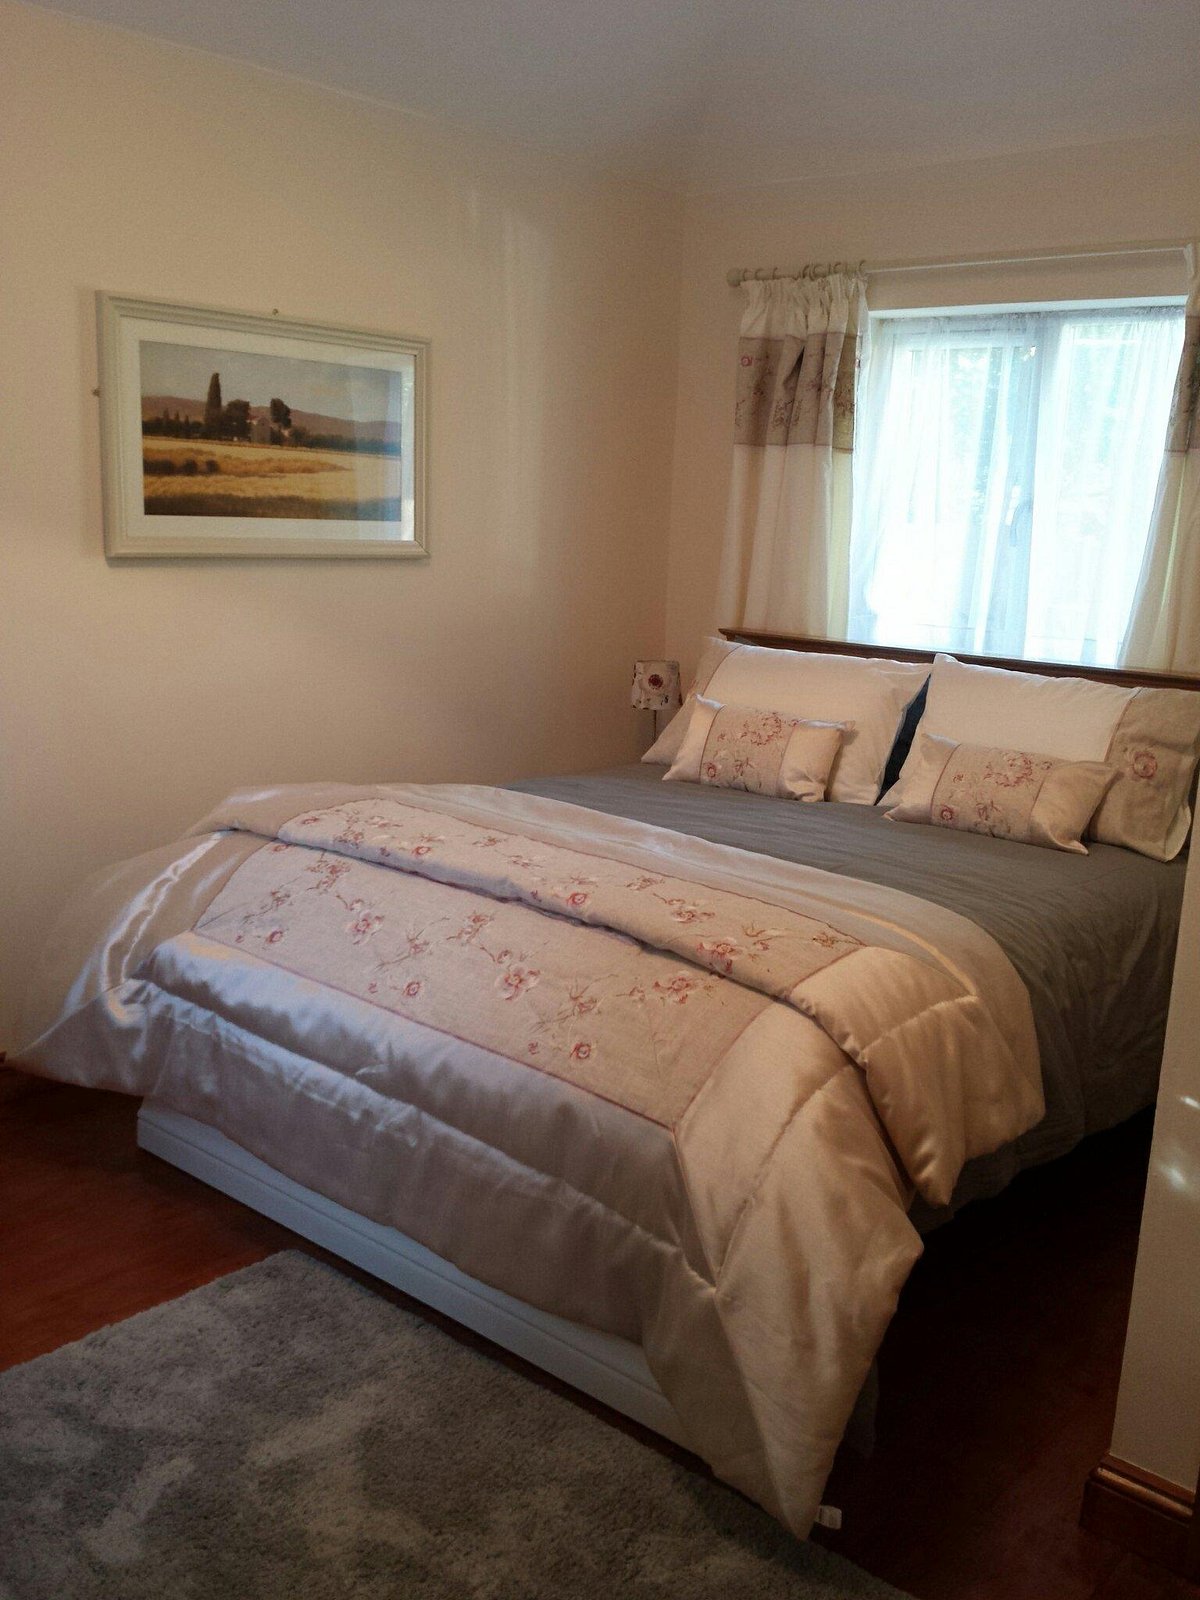 Bramble Rose Bed & Breakfast - UPDATED Prices, Reviews & Photos